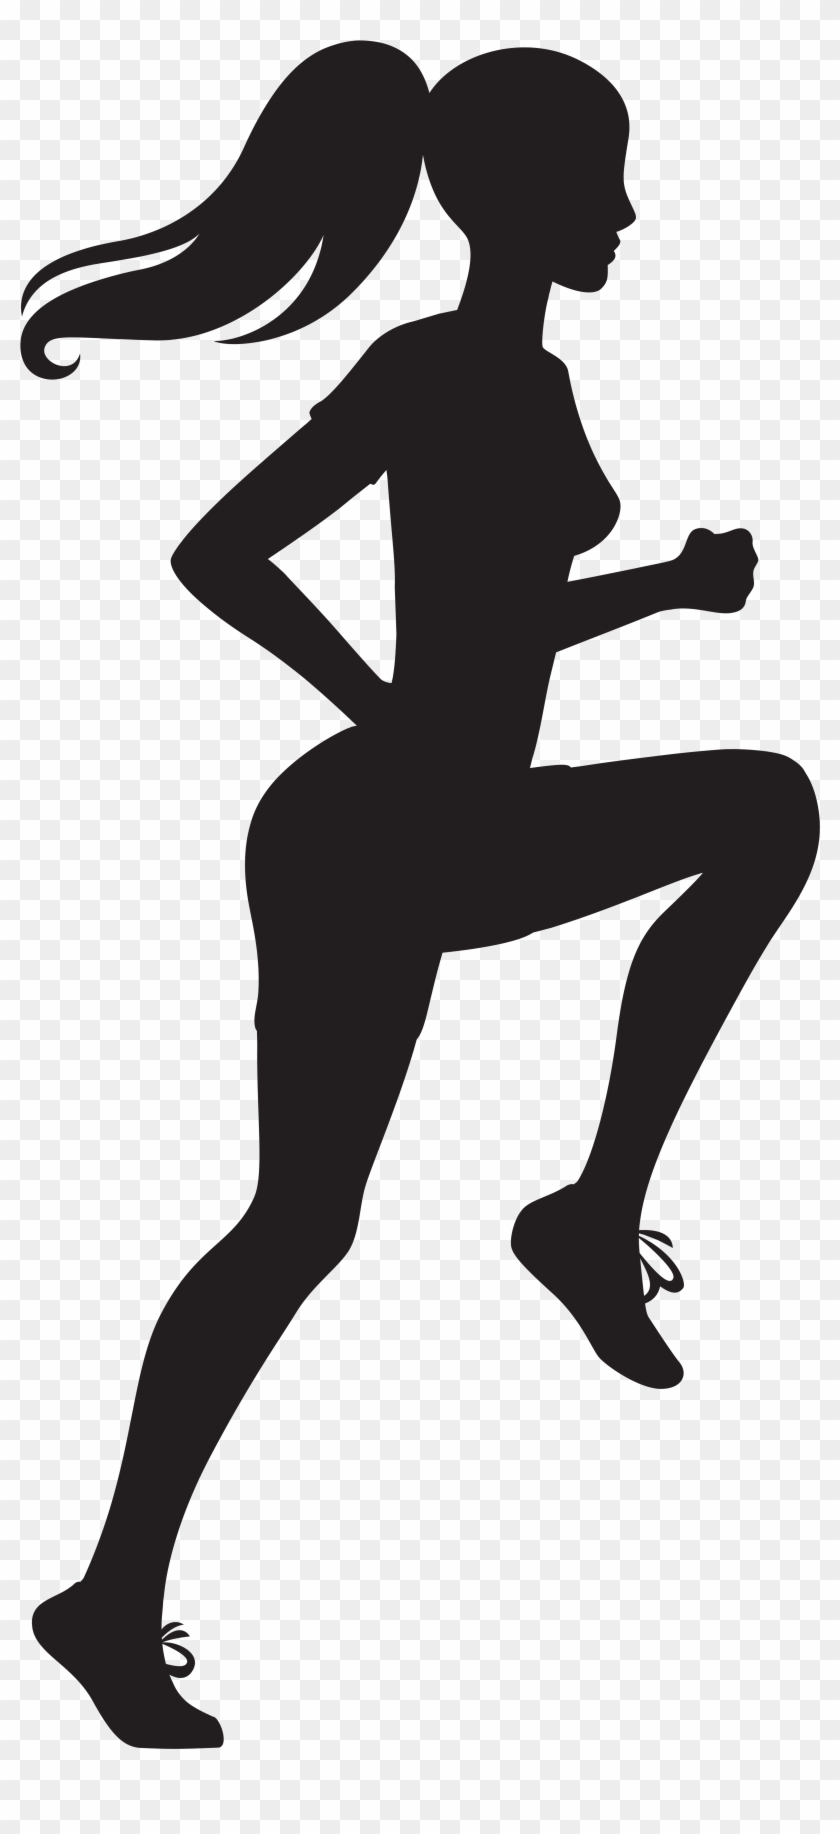 Running Woman Silhouette Transparent Image.